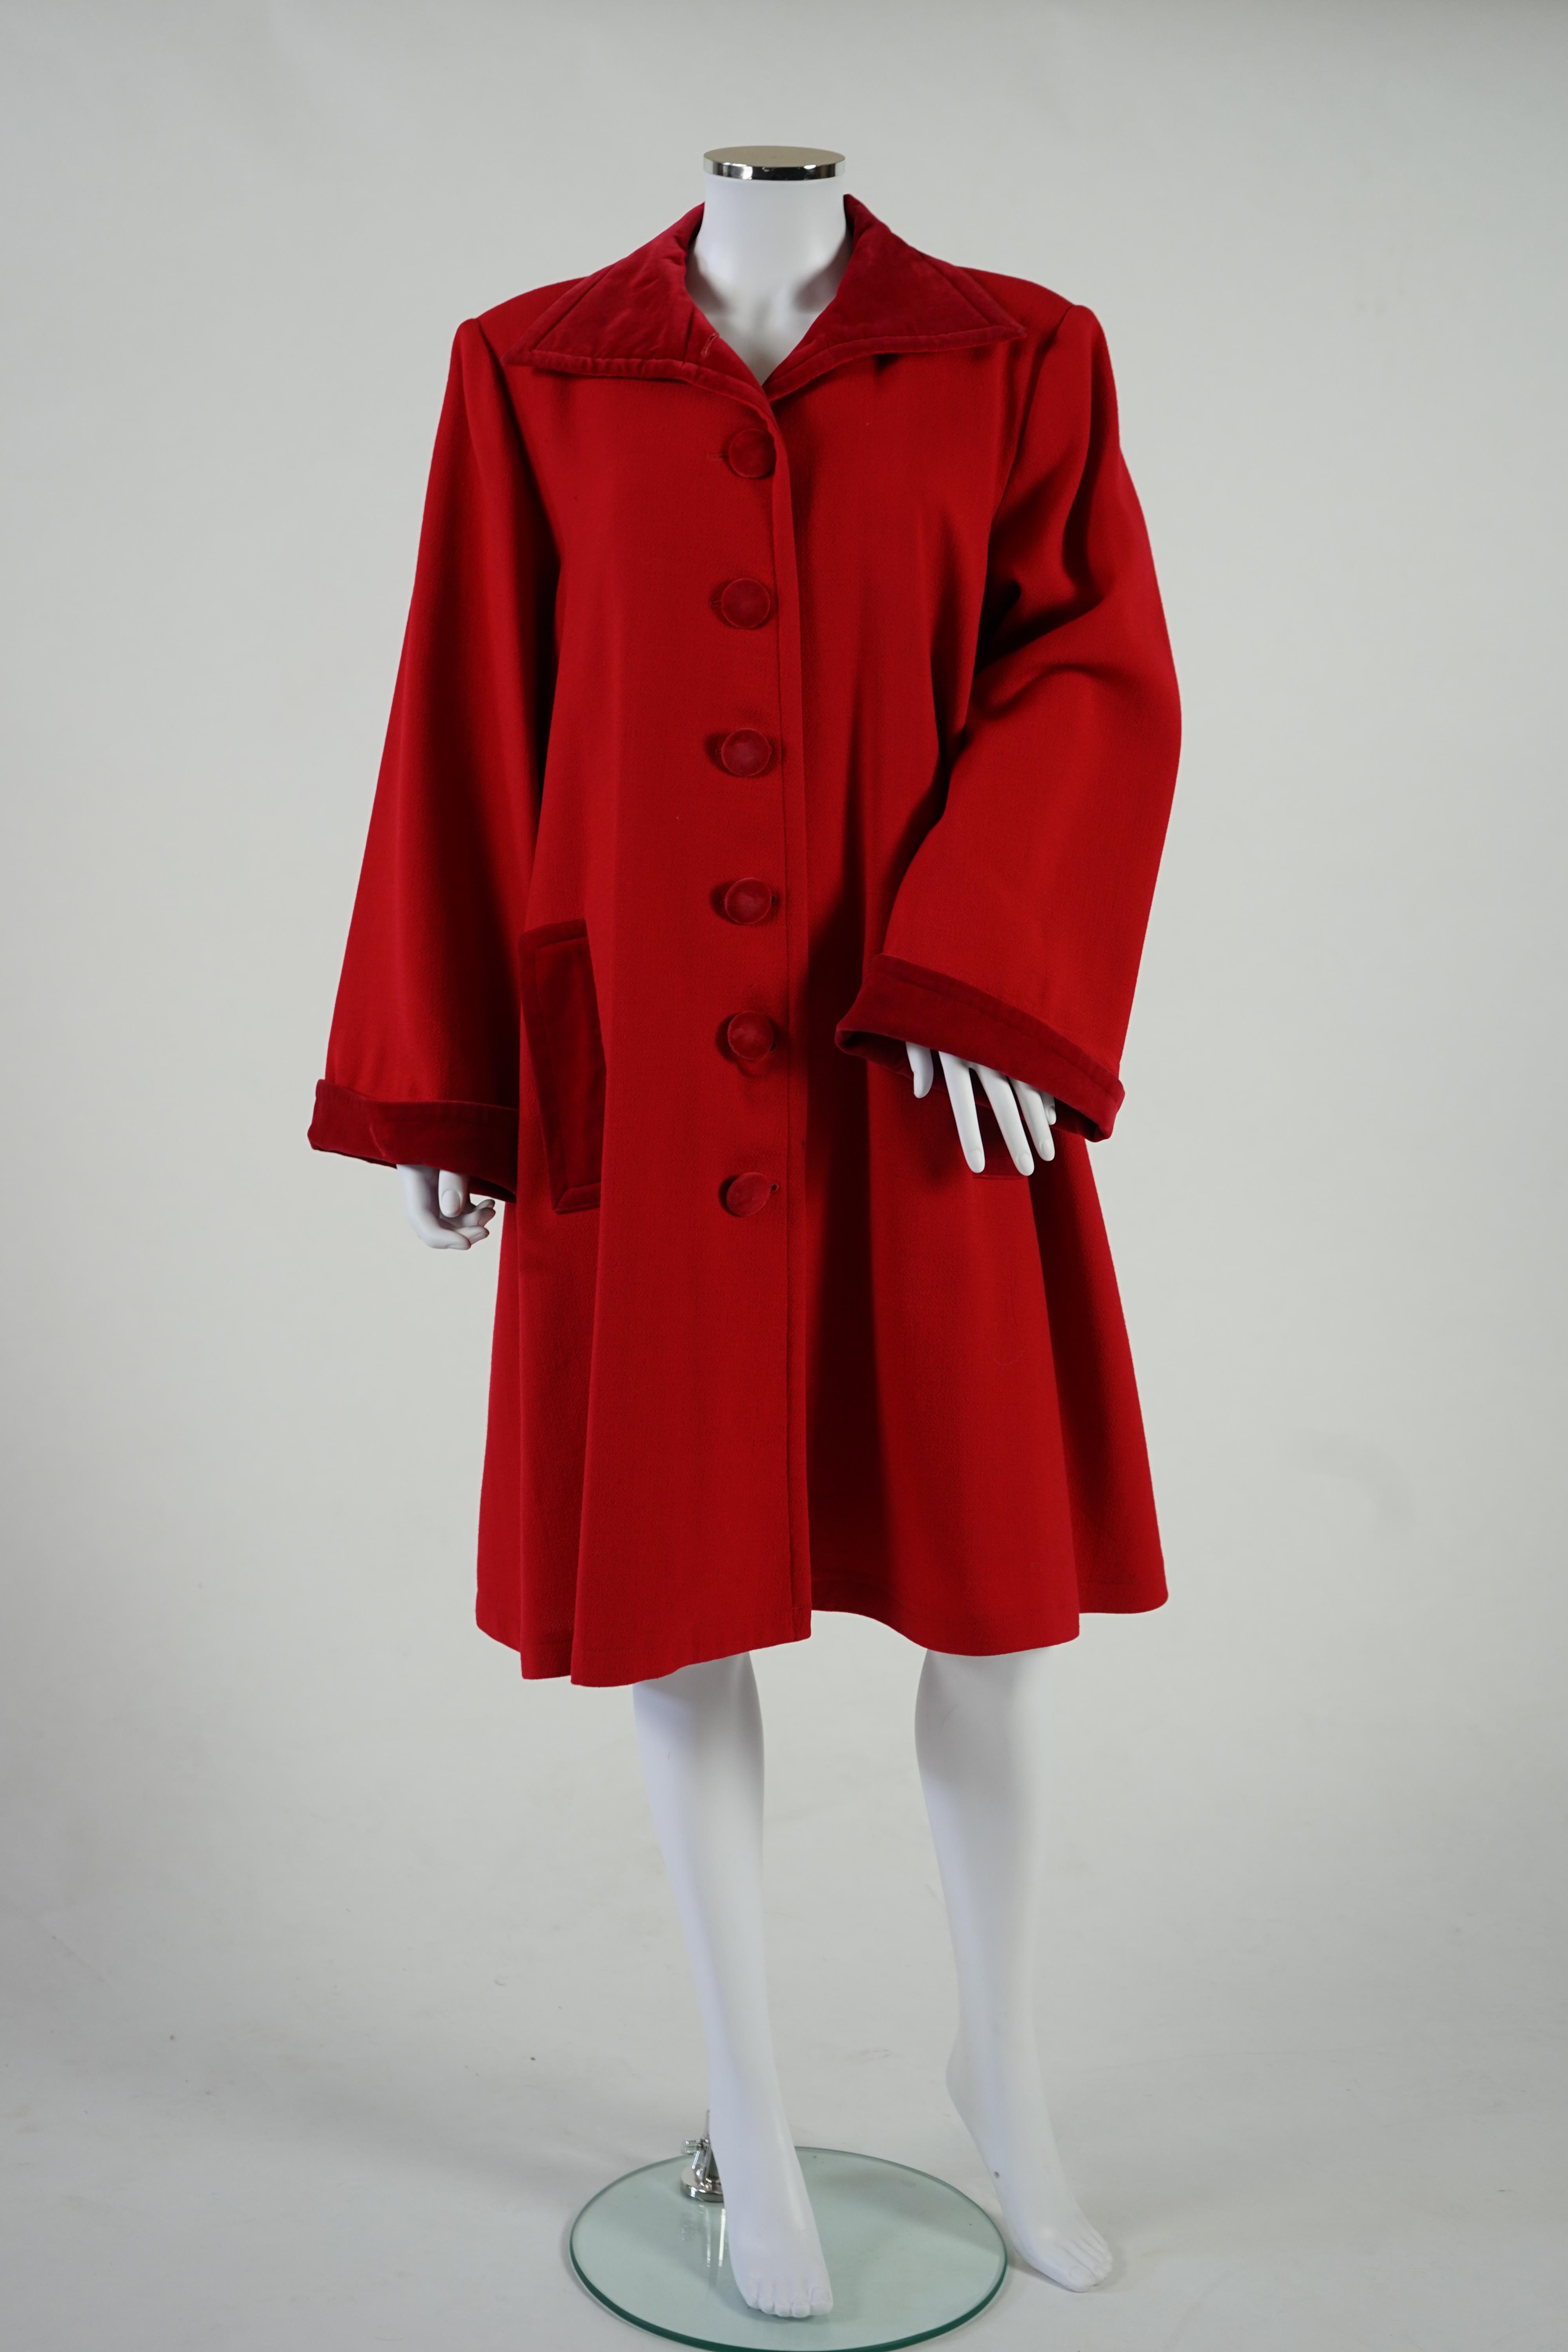 A vintage Yves Saint Laurent variation lady's red wool coat with velvet trim, F 40 (UK 12). Proceeds to Happy Paws Puppy Rescue